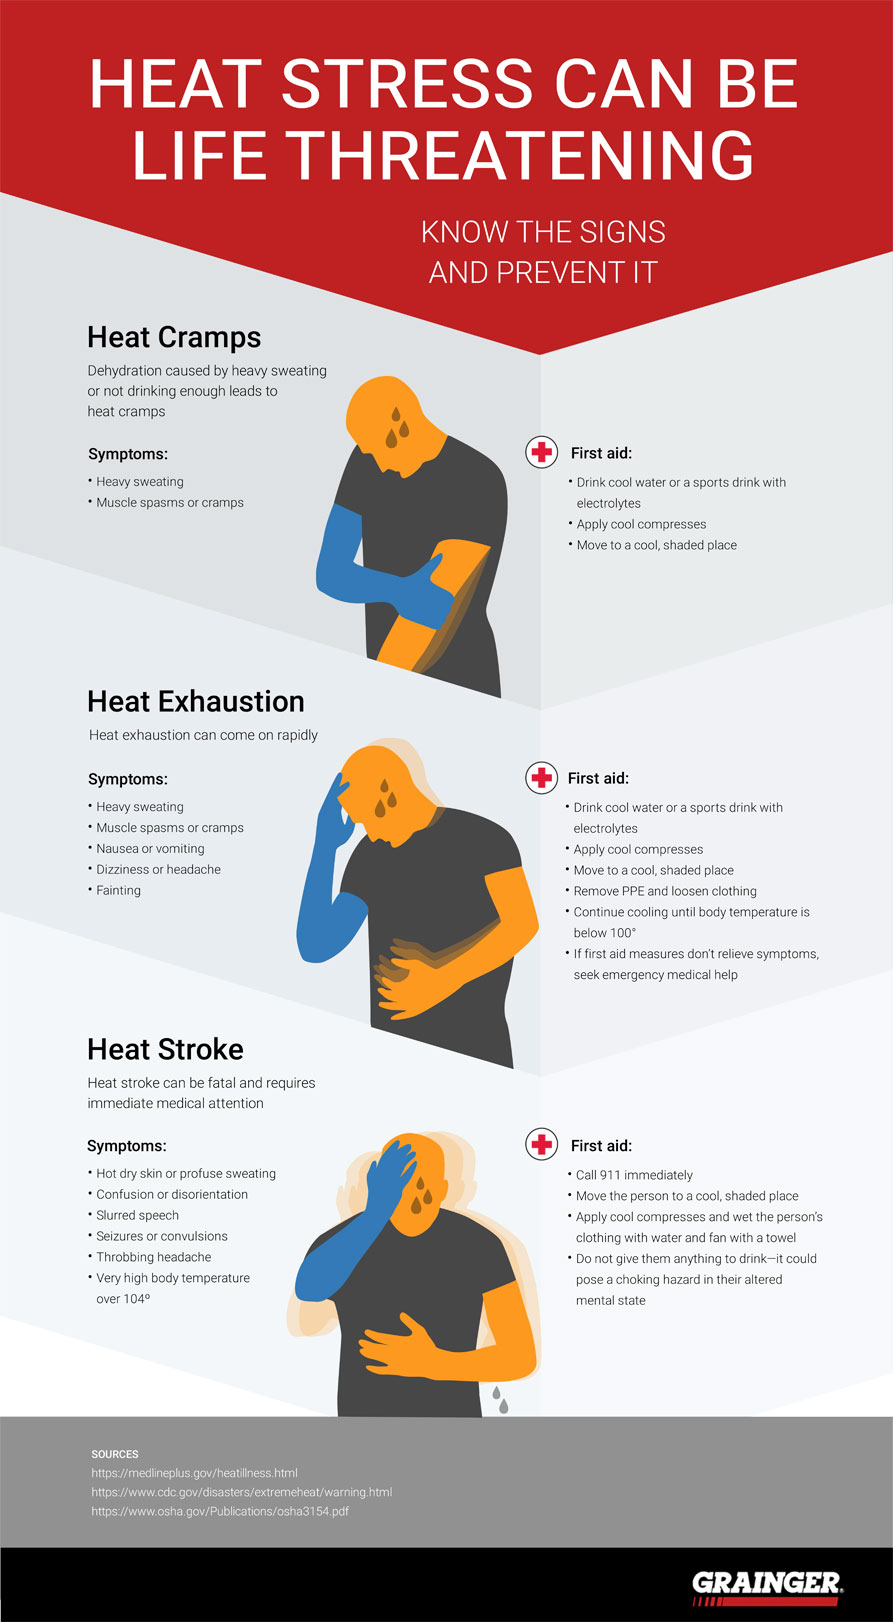 Know The Signs Of Heat Stress Symptoms Grainger Knowhow - Riset